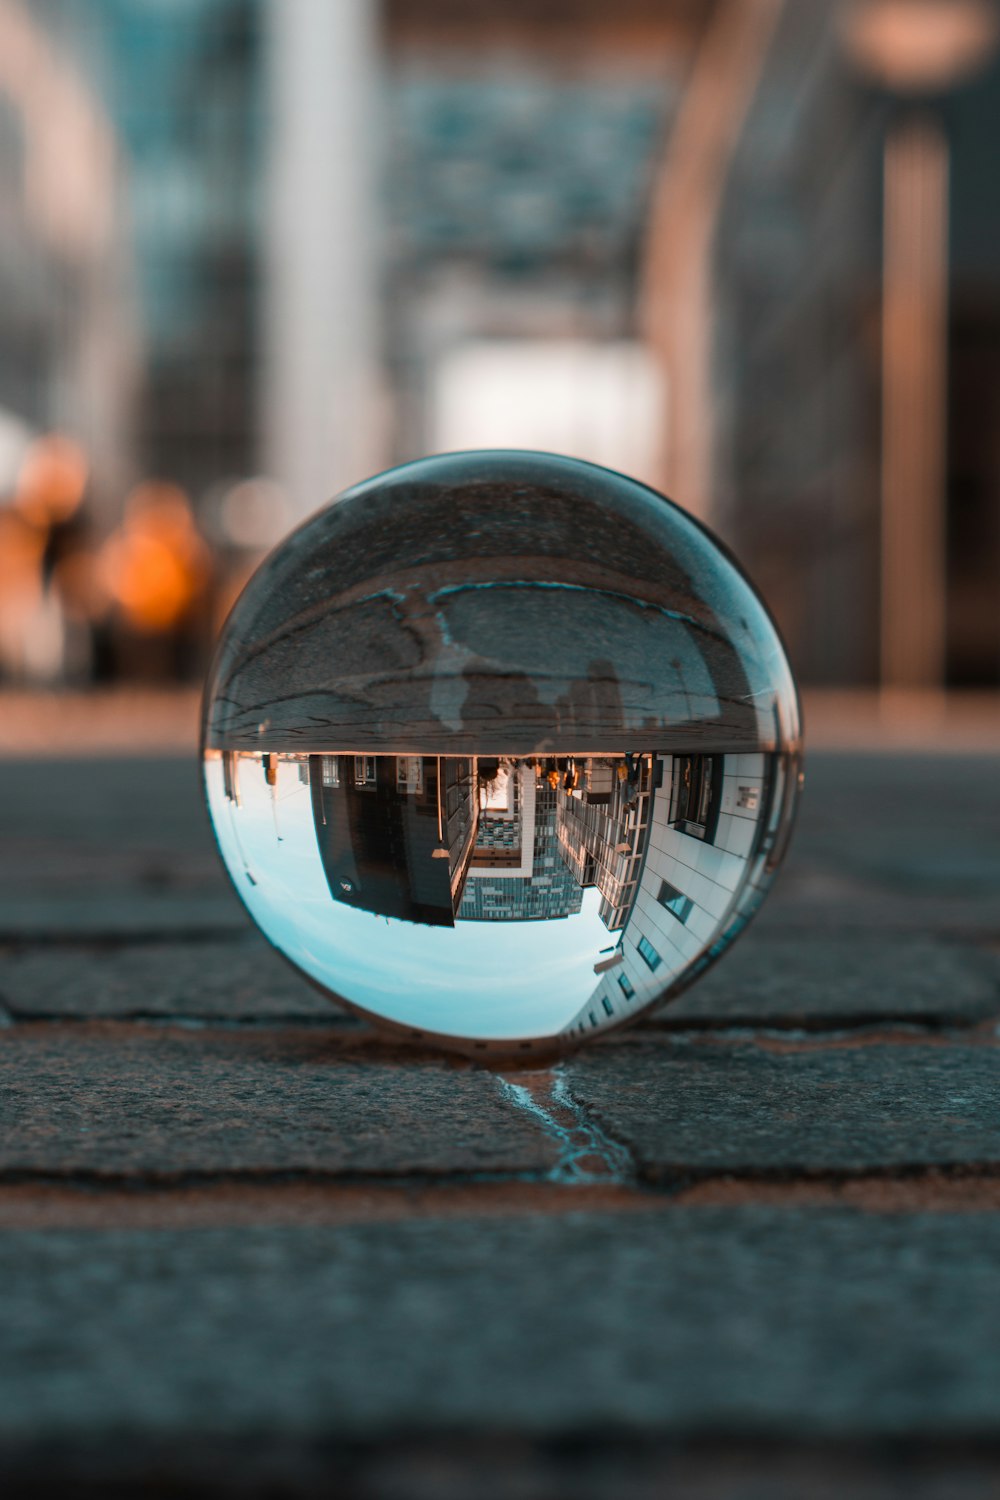 a reflection of a building in a glass ball